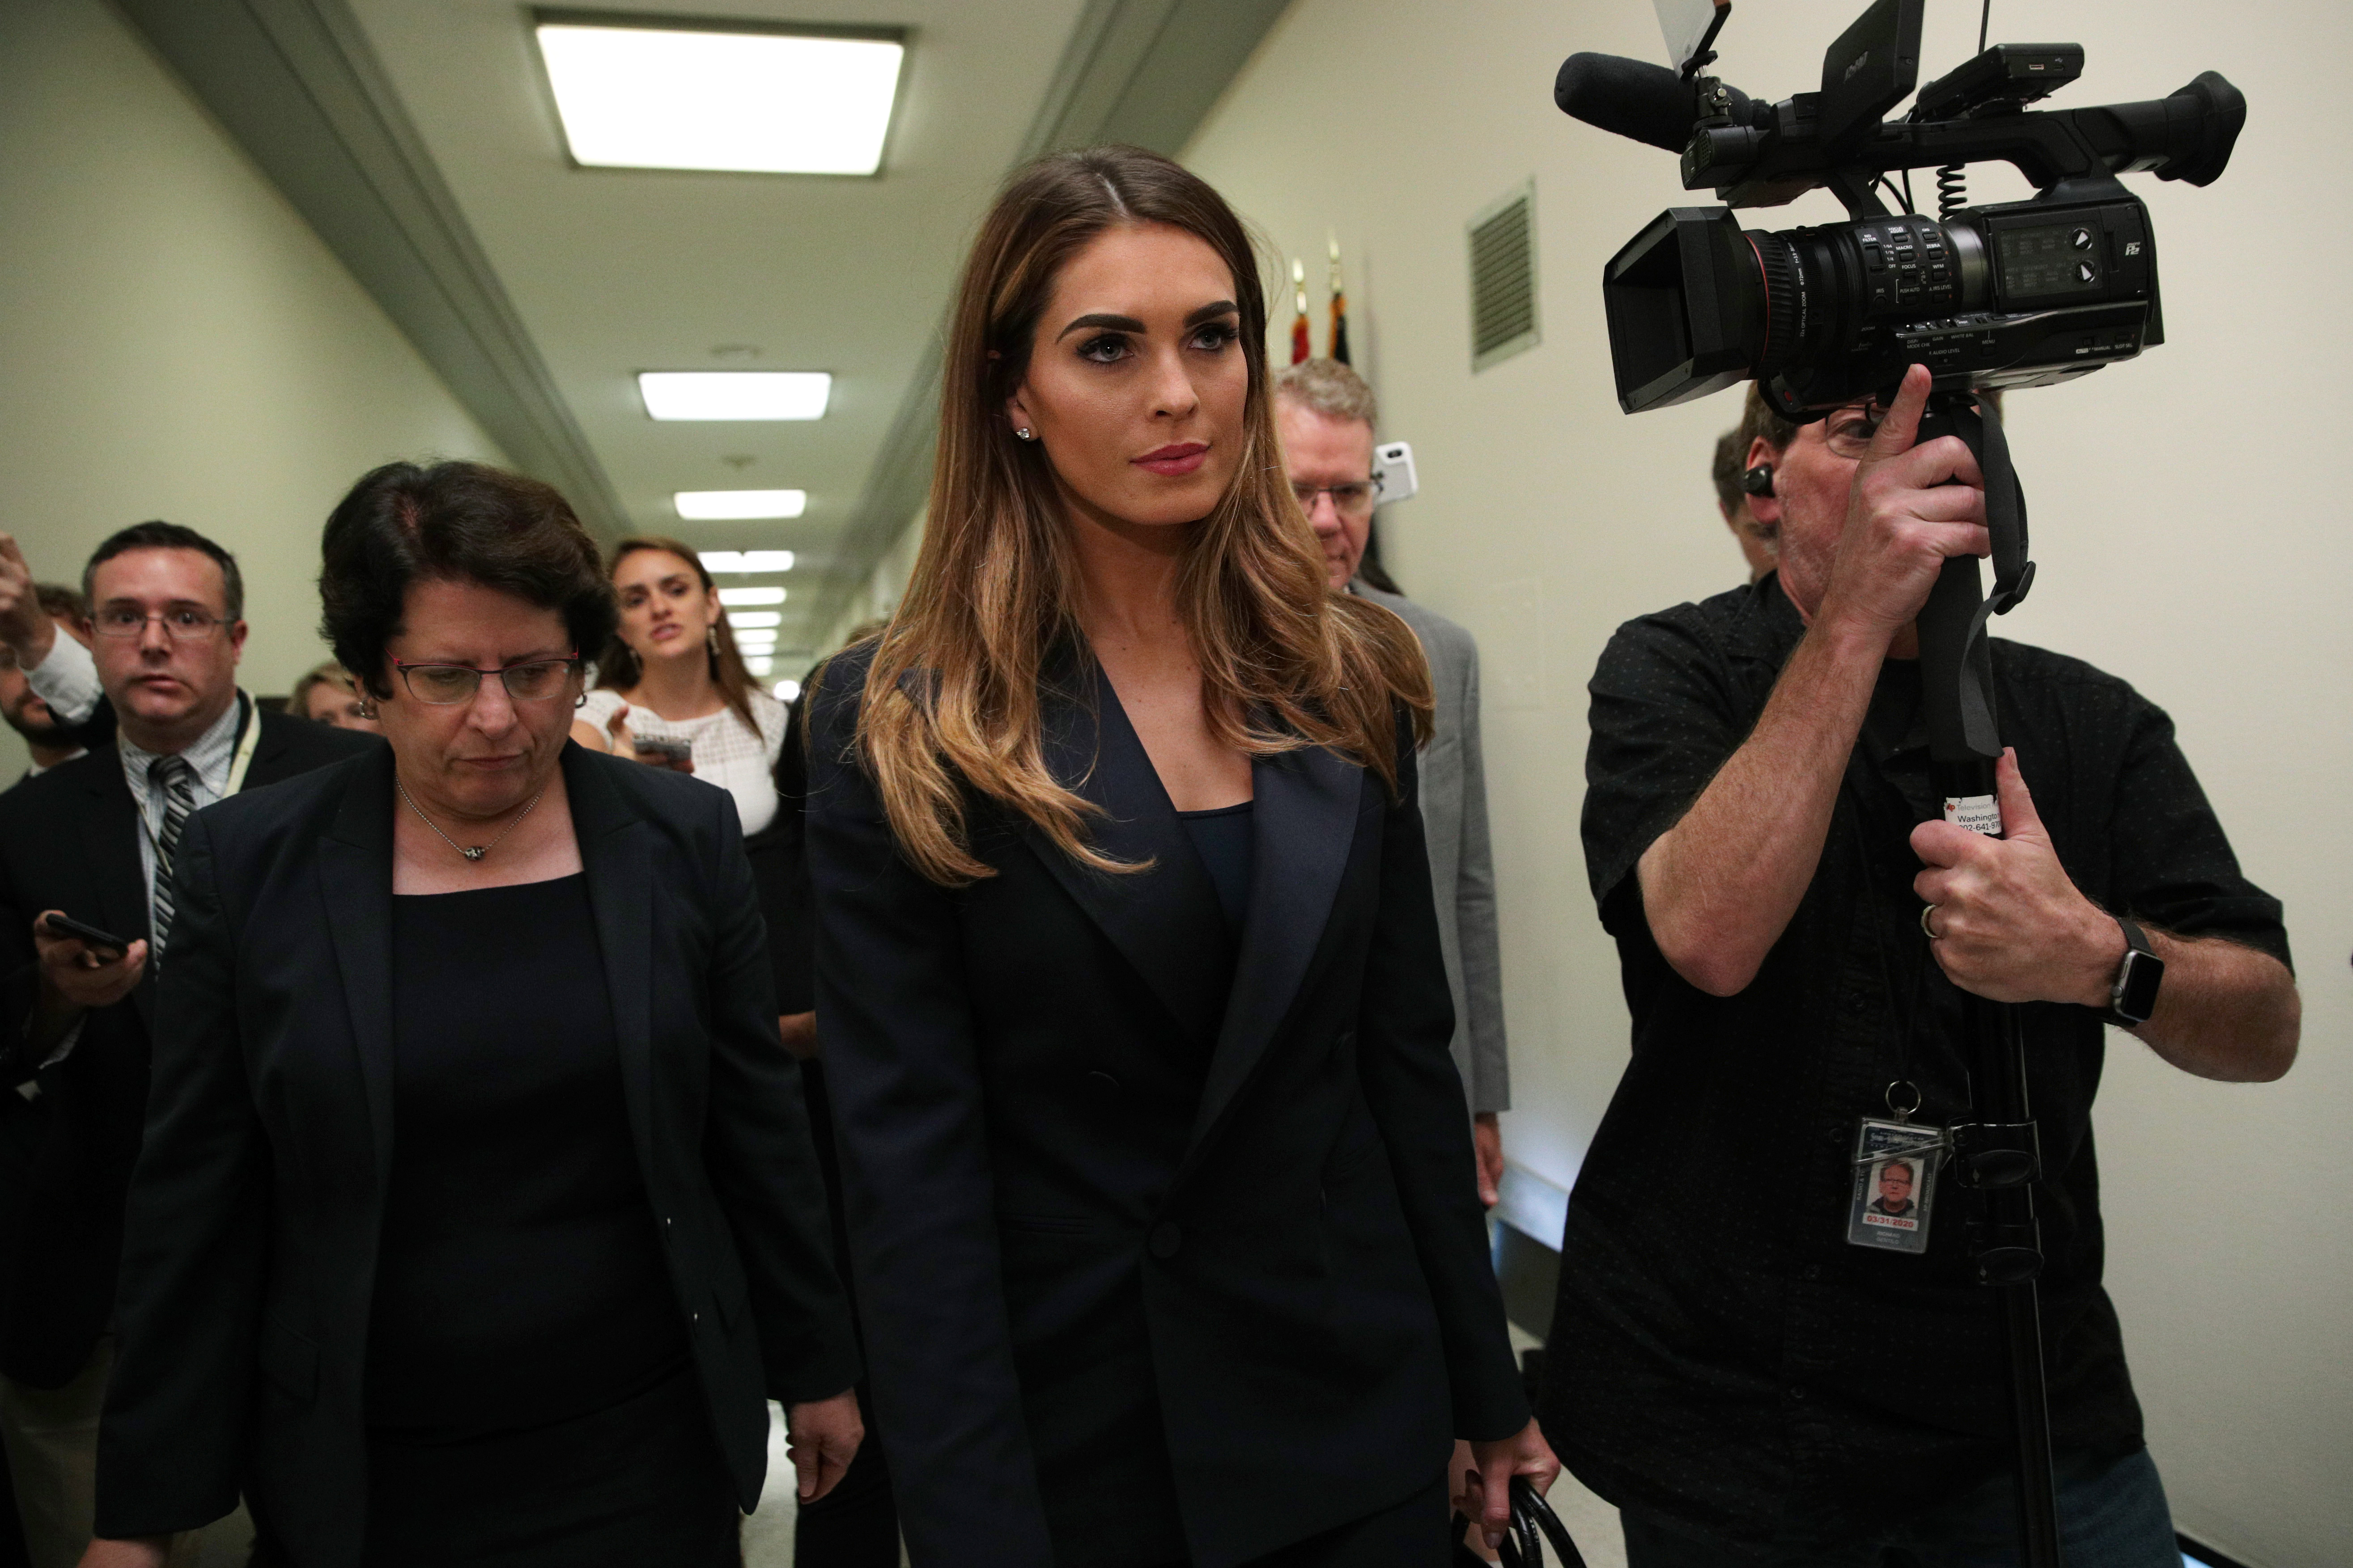 Former White House communications director Hope Hicks leaves the hearing room during a break at a closed-door interview with the House Judiciary Committee June 19, 2019 on Capitol Hill in Washington, DC. (Alex Wong/Getty Images)